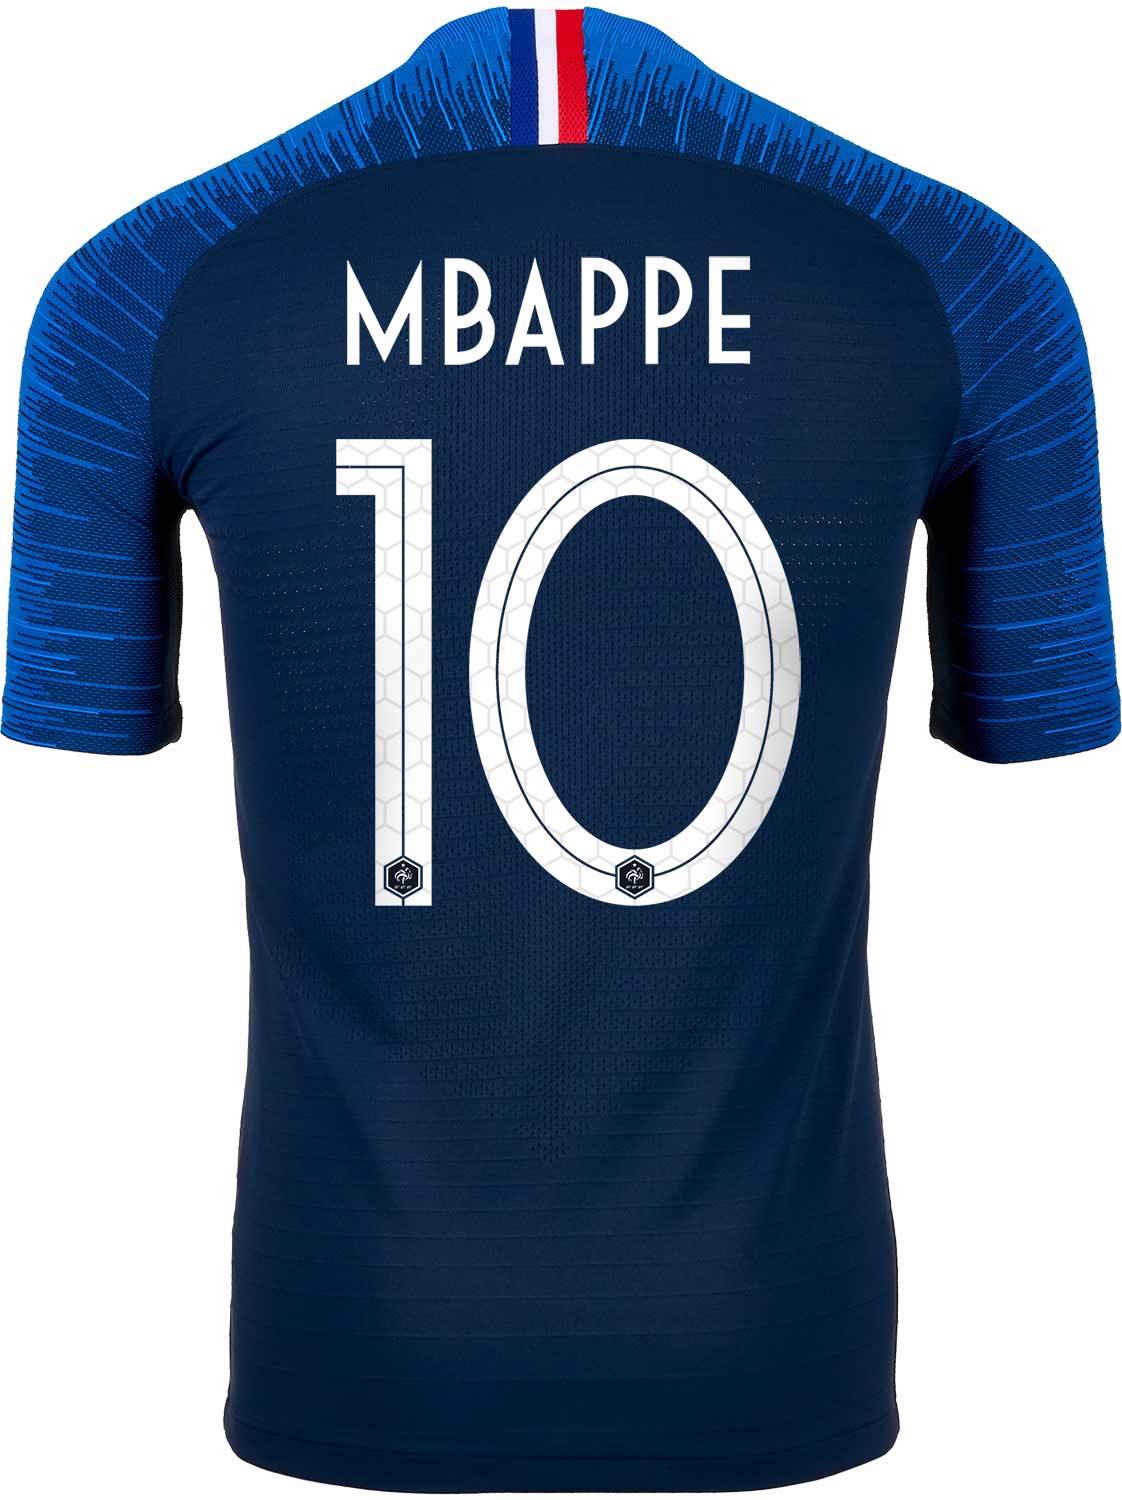 Mbappe Jersey Management And Leadership